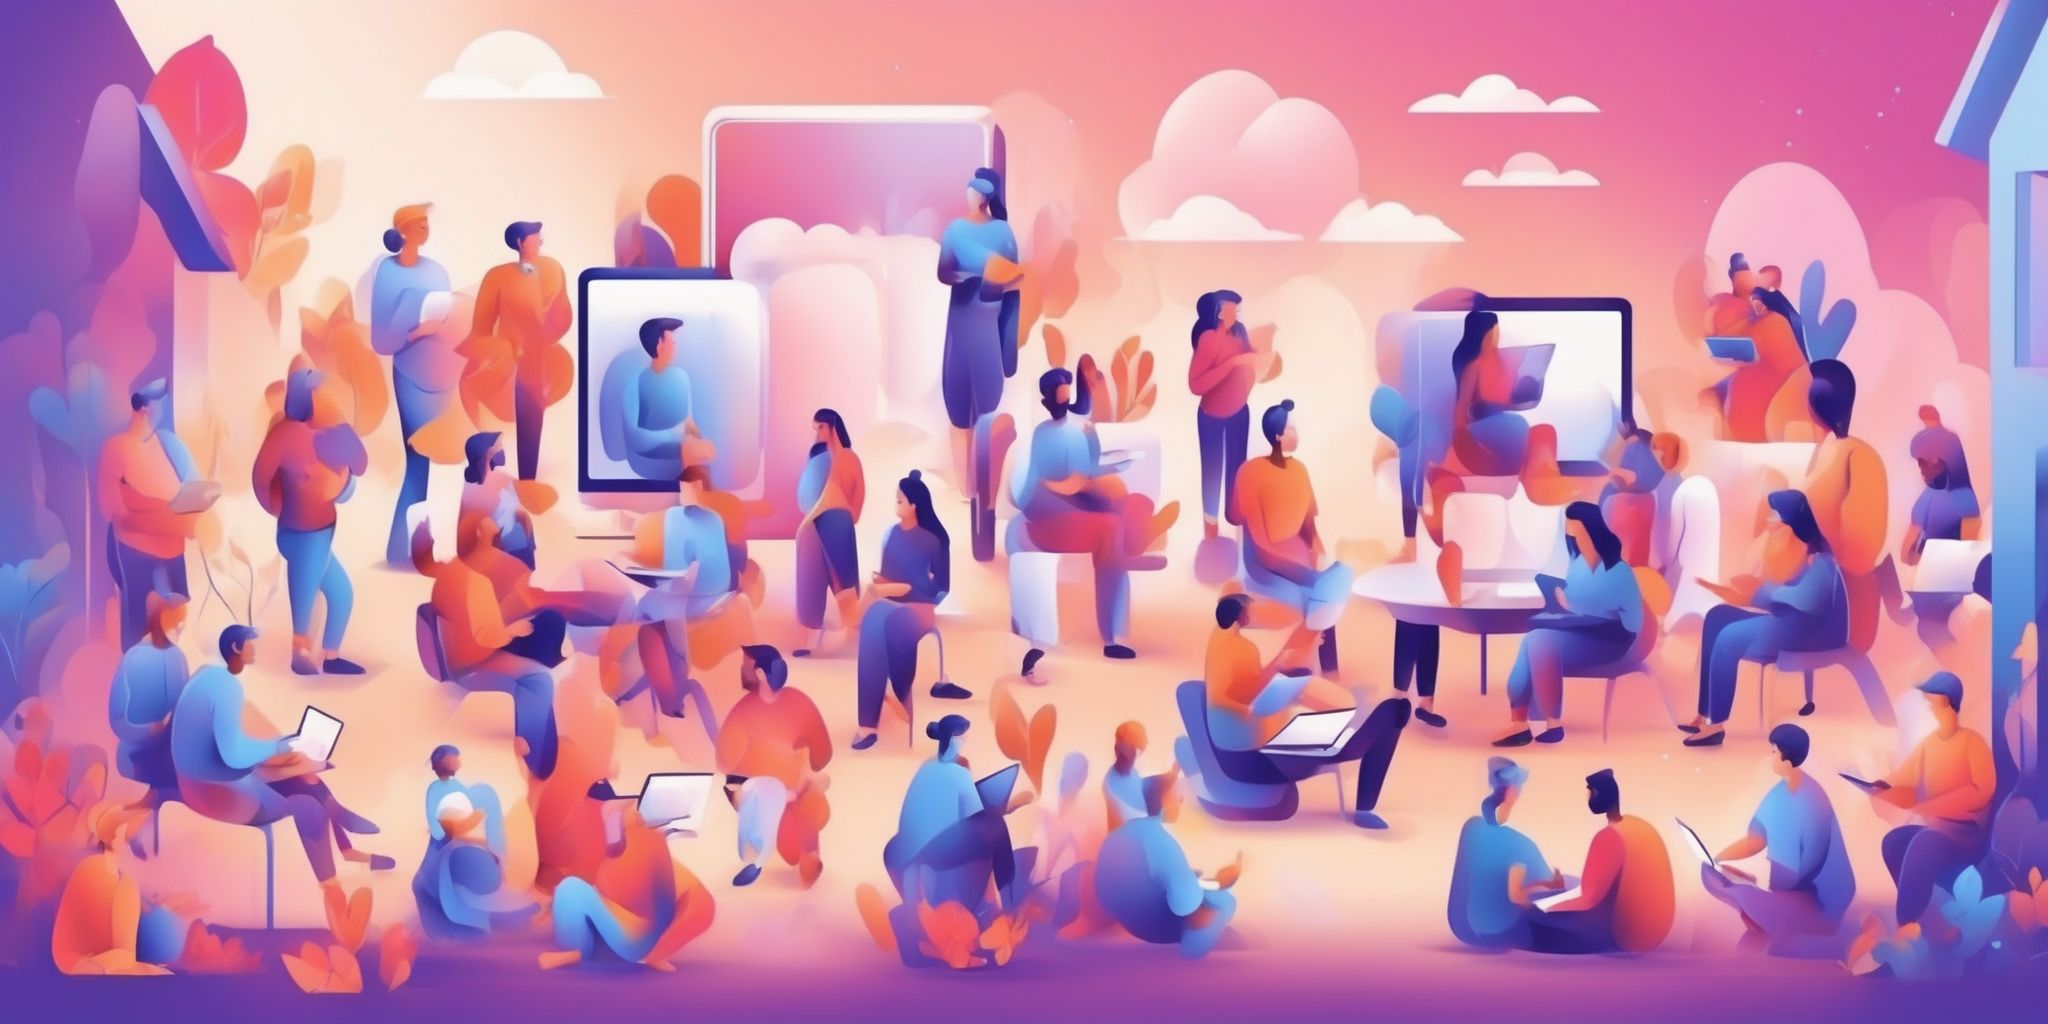 Online community building in illustration style with gradients and white background